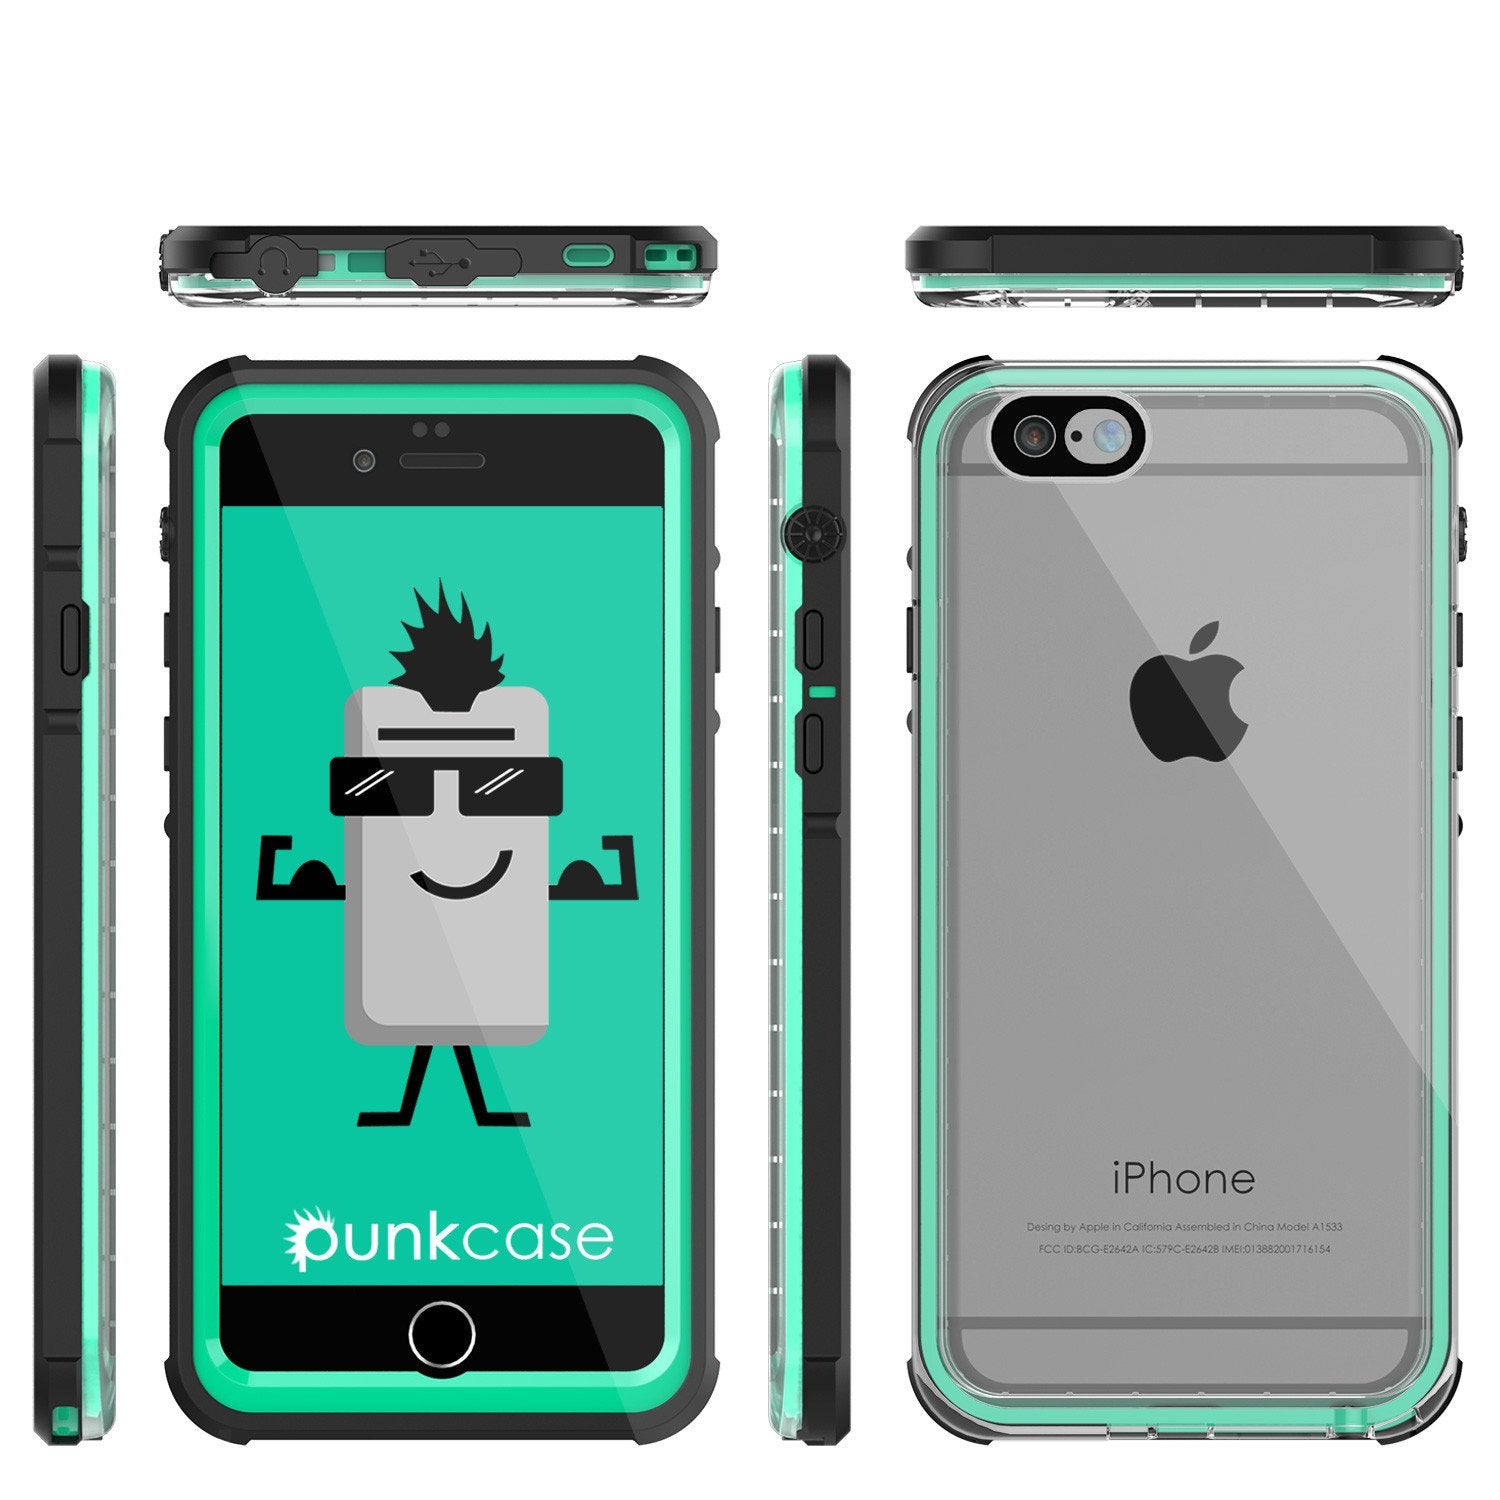 iPhone 6/6S Waterproof Case, PUNKcase CRYSTAL Teal W/ Attached Screen Protector  | Warranty